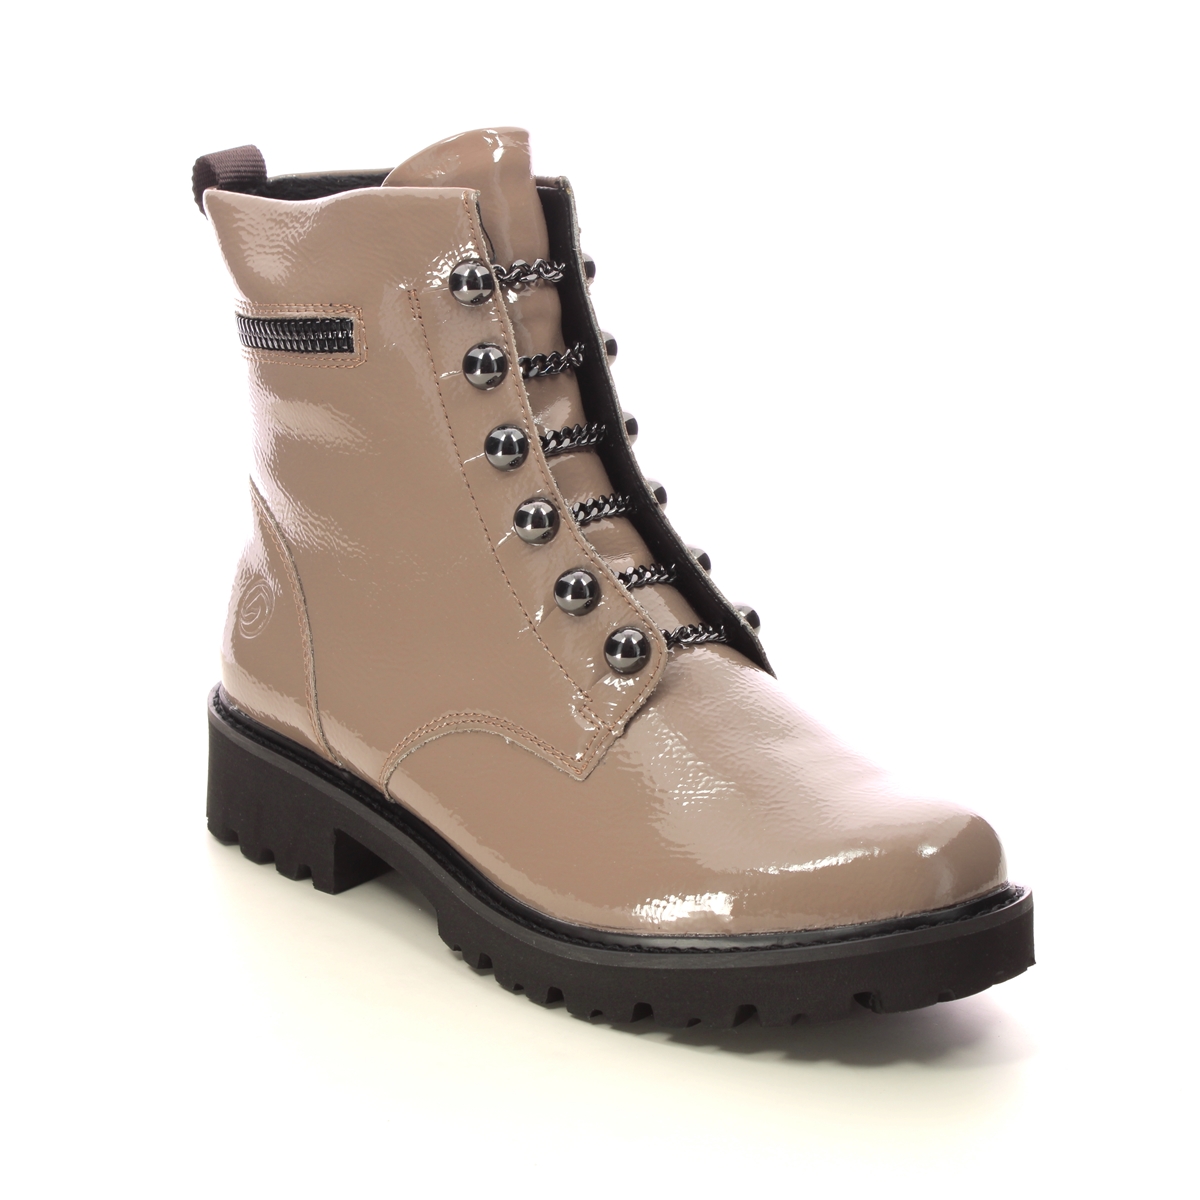 Remonte Docland Taupe Patent Womens Biker Boots D8670-20 In Size 37 In Plain Taupe Patent